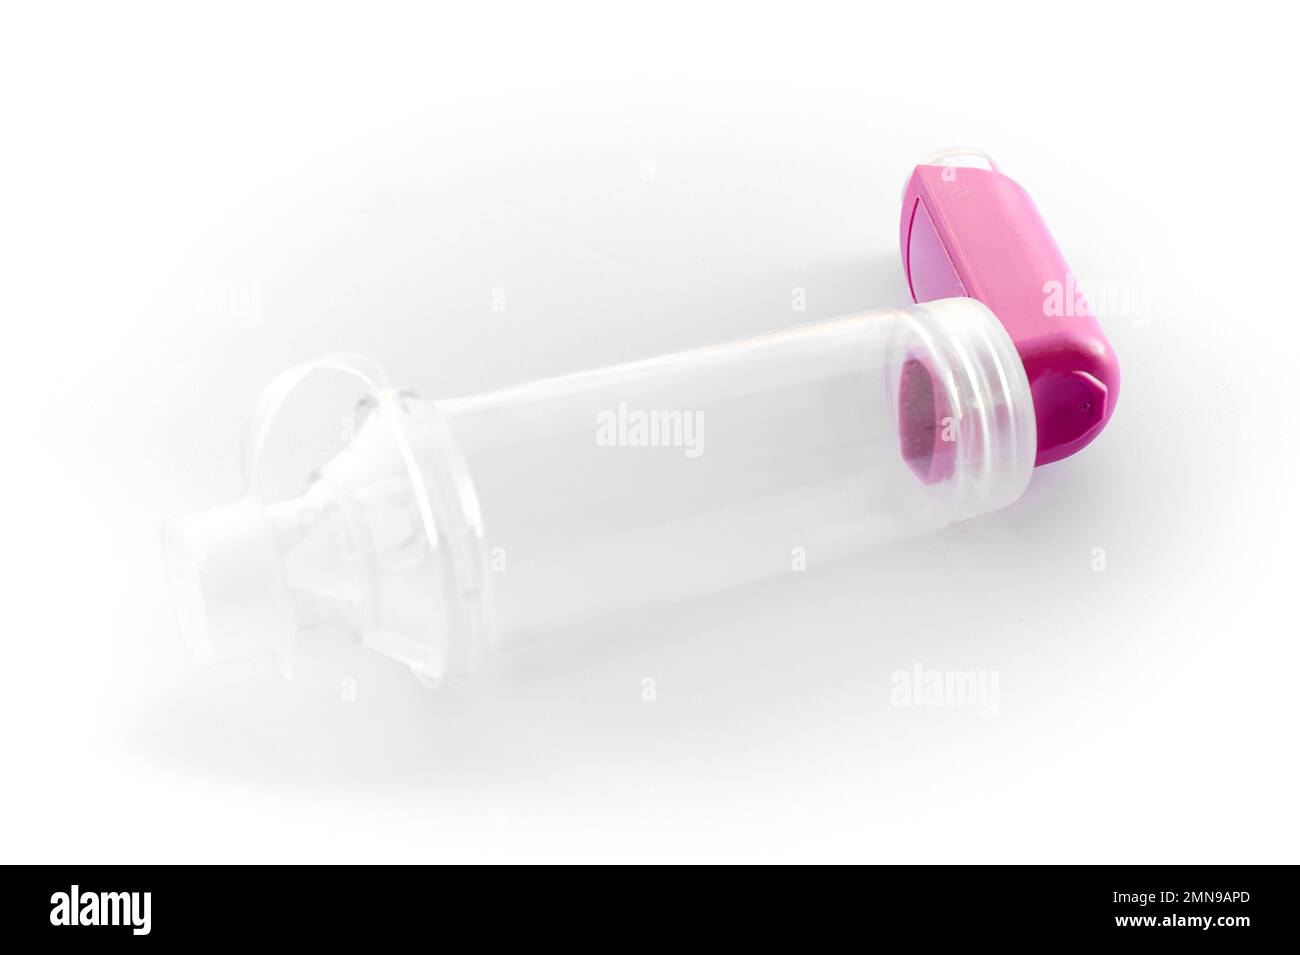 Lung medication with corticosteroids for asthma or COPD. An inhaler with spacer with white background. Stock Photo